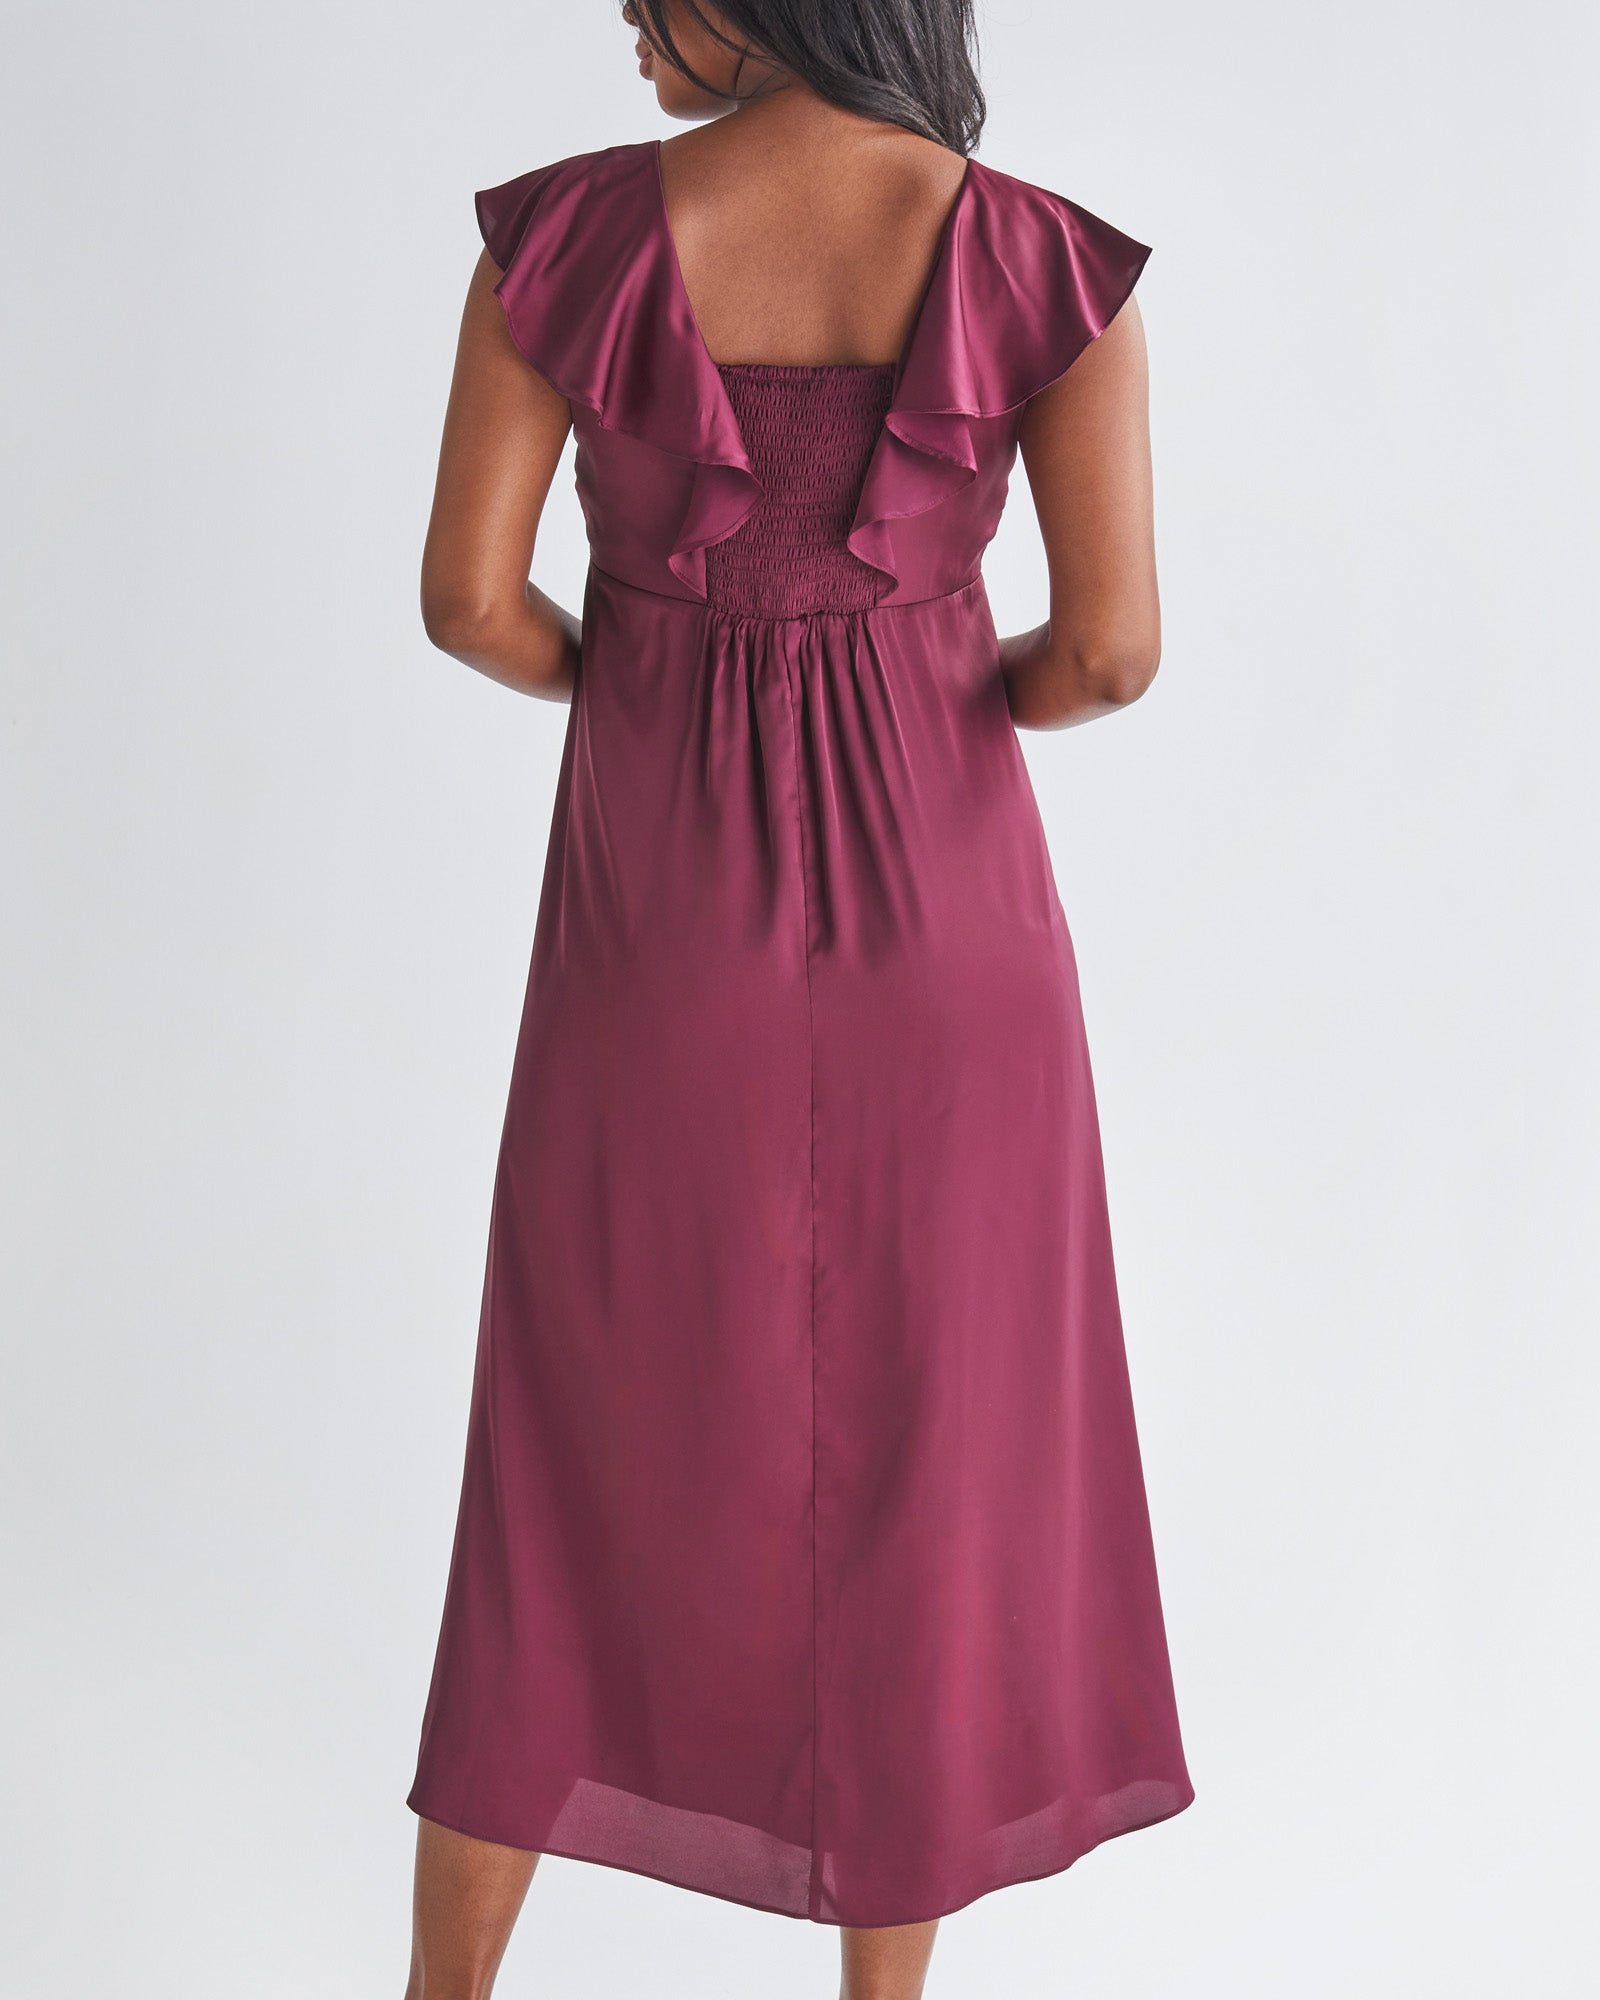 Back View - A Pregnannt Woman Wearing Mika Maternity Evening Ruffle Dress in Wine from Angel Maternity.